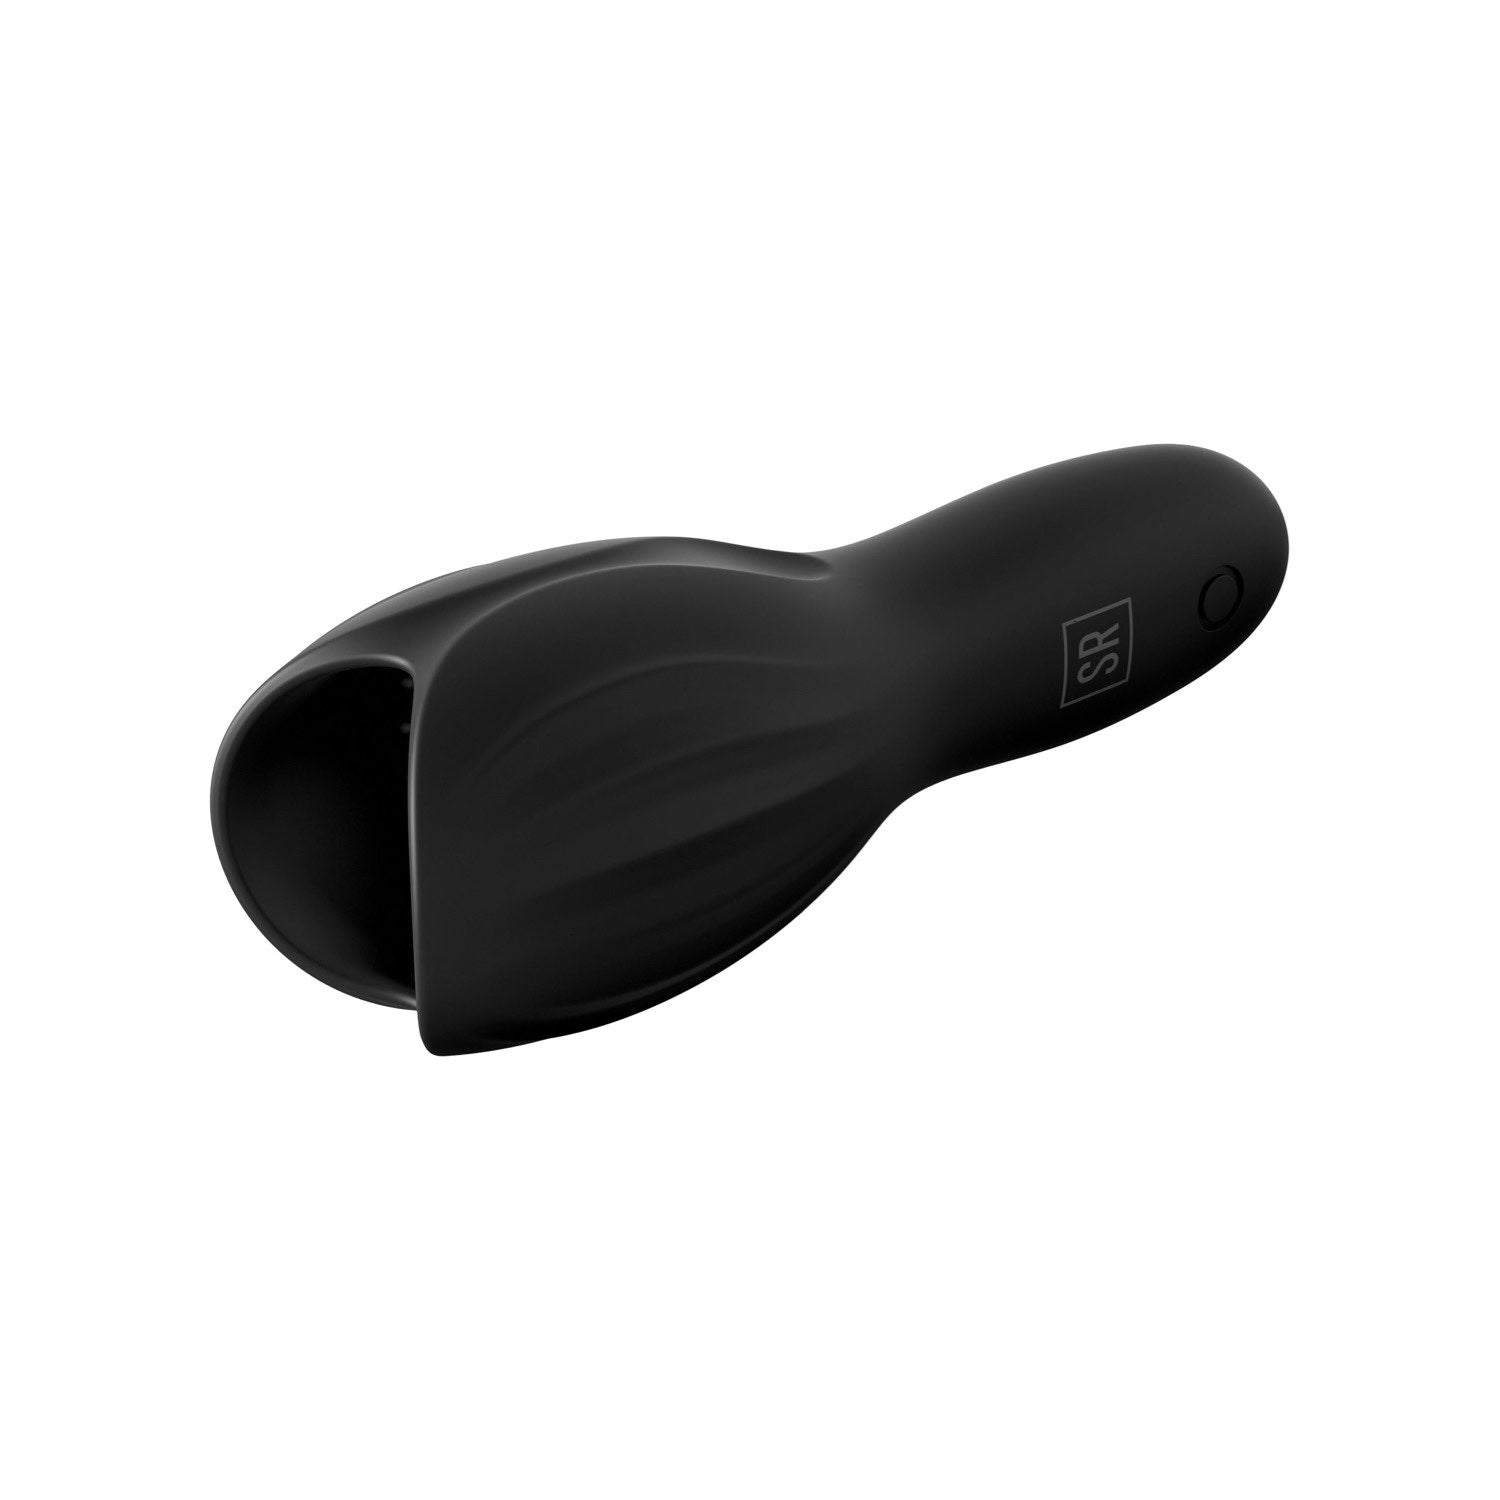 Sir Richards Beginner Silicone Cock Teaser - Black USB Rechargeable Masturbator by Pipedream